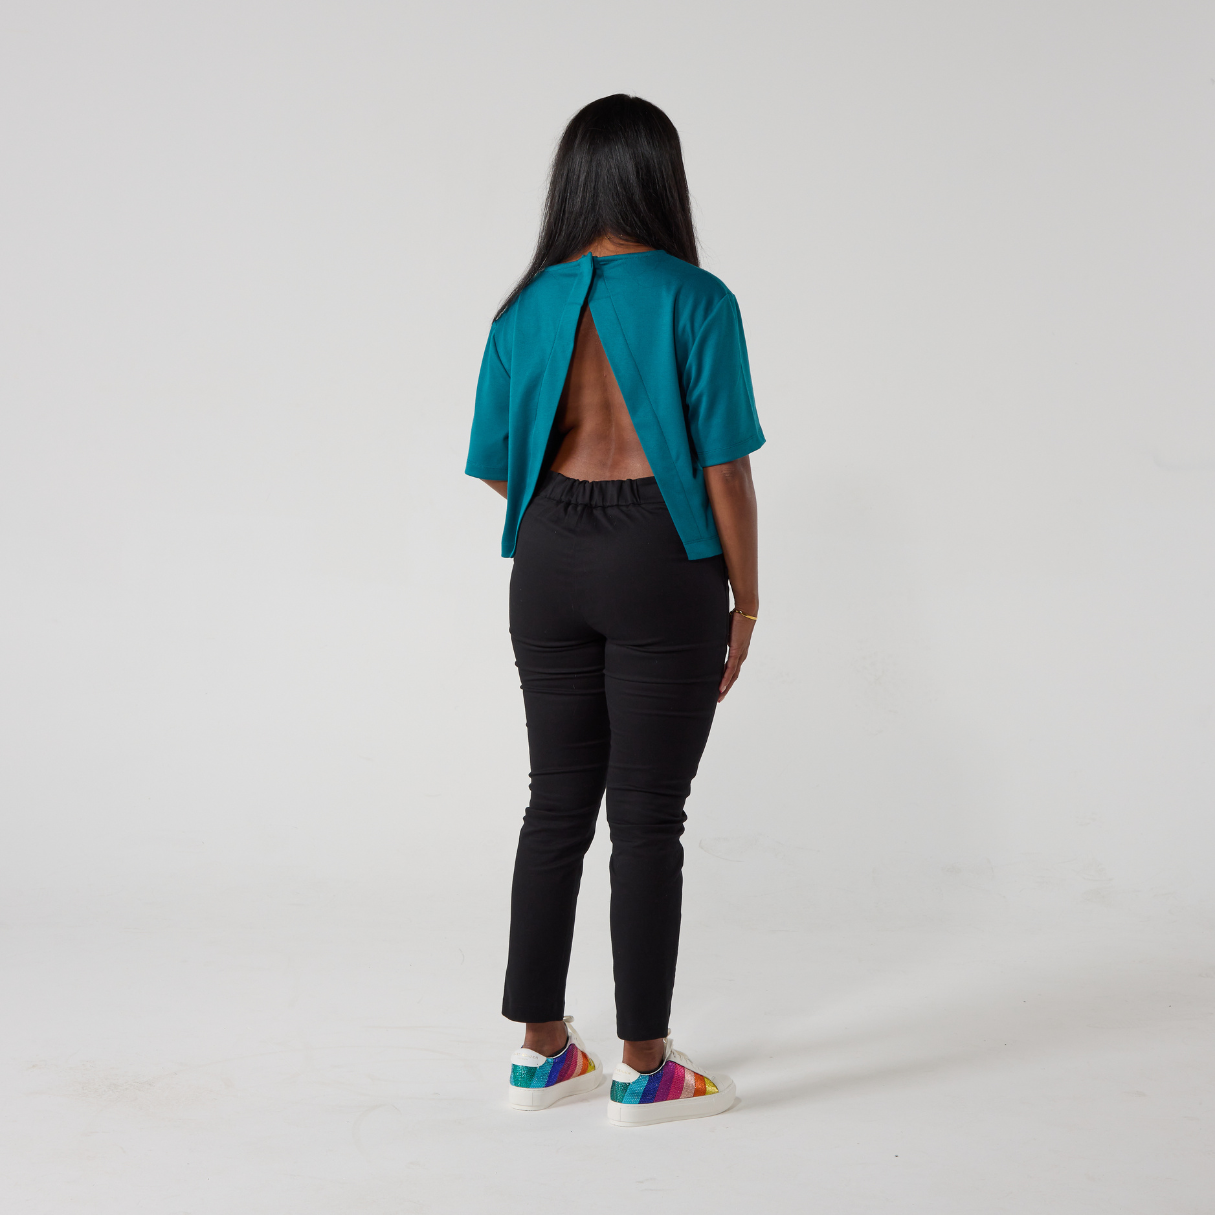 Model is female presenting and is south asian. They are wearing a teal coloured cropped t-shirt style top, this is the back view and it is a wrap over at the neck but with skin visible giving it a backless appearance. They are against an off white background.